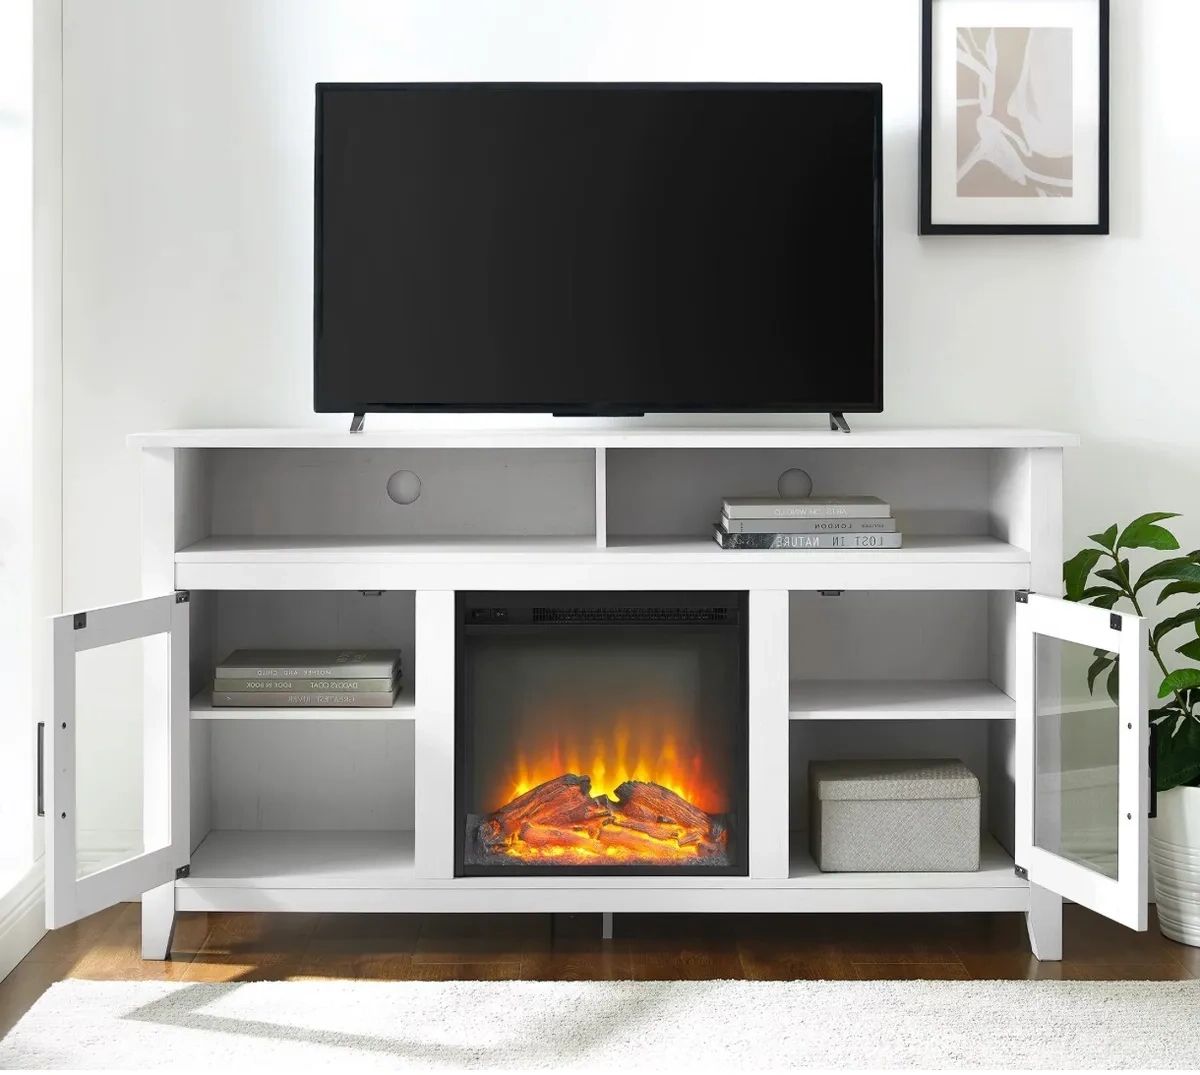 Woven Paths Highboy 2 Door Electric Fireplace Tv Stand For Tvs Up To 65",  Brushe | Ebay With Wood Highboy Fireplace Tv Stands (Gallery 11 of 20)